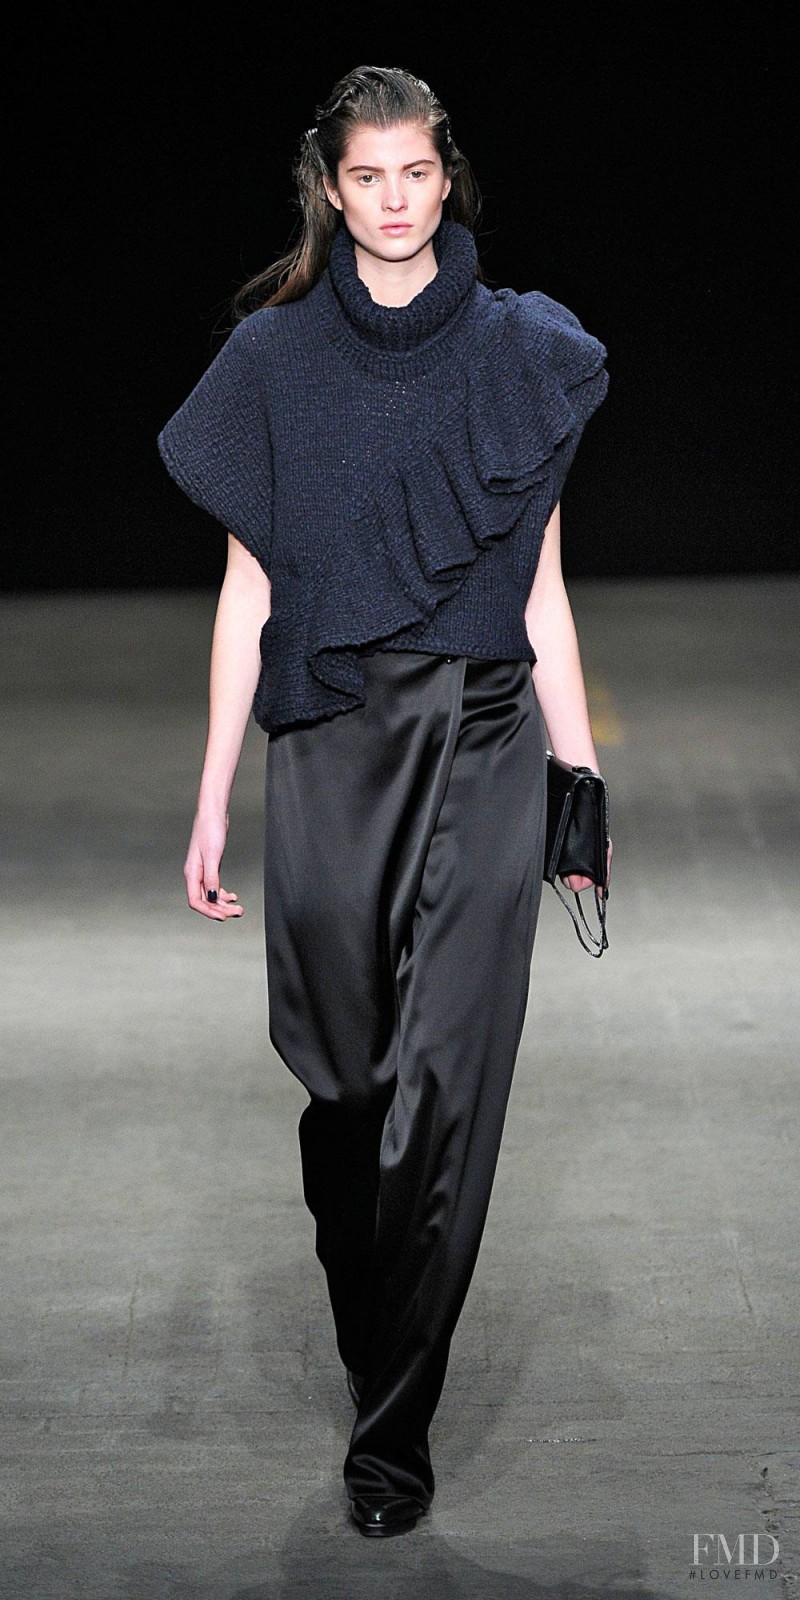 Estee Rammant featured in  the 3.1 Phillip Lim fashion show for Autumn/Winter 2014